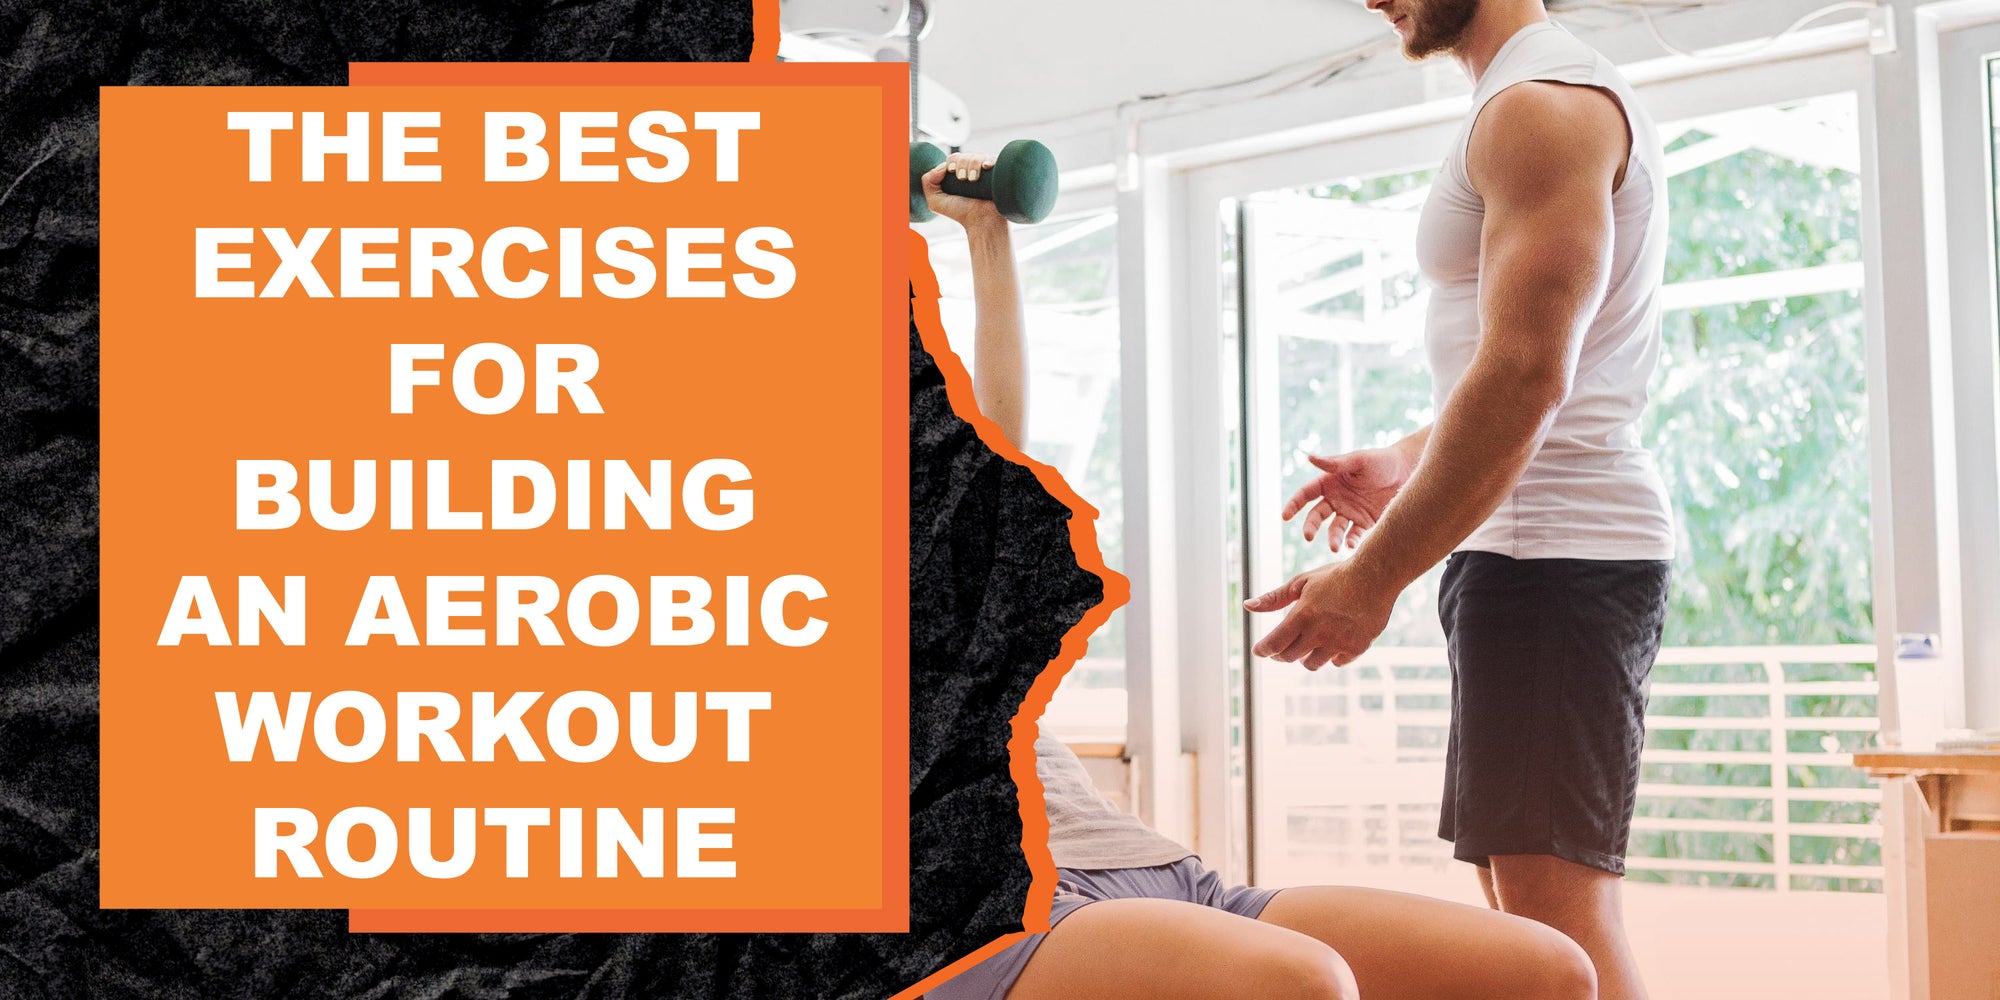 The Best Exercises for Building an Aerobic Workout Routine